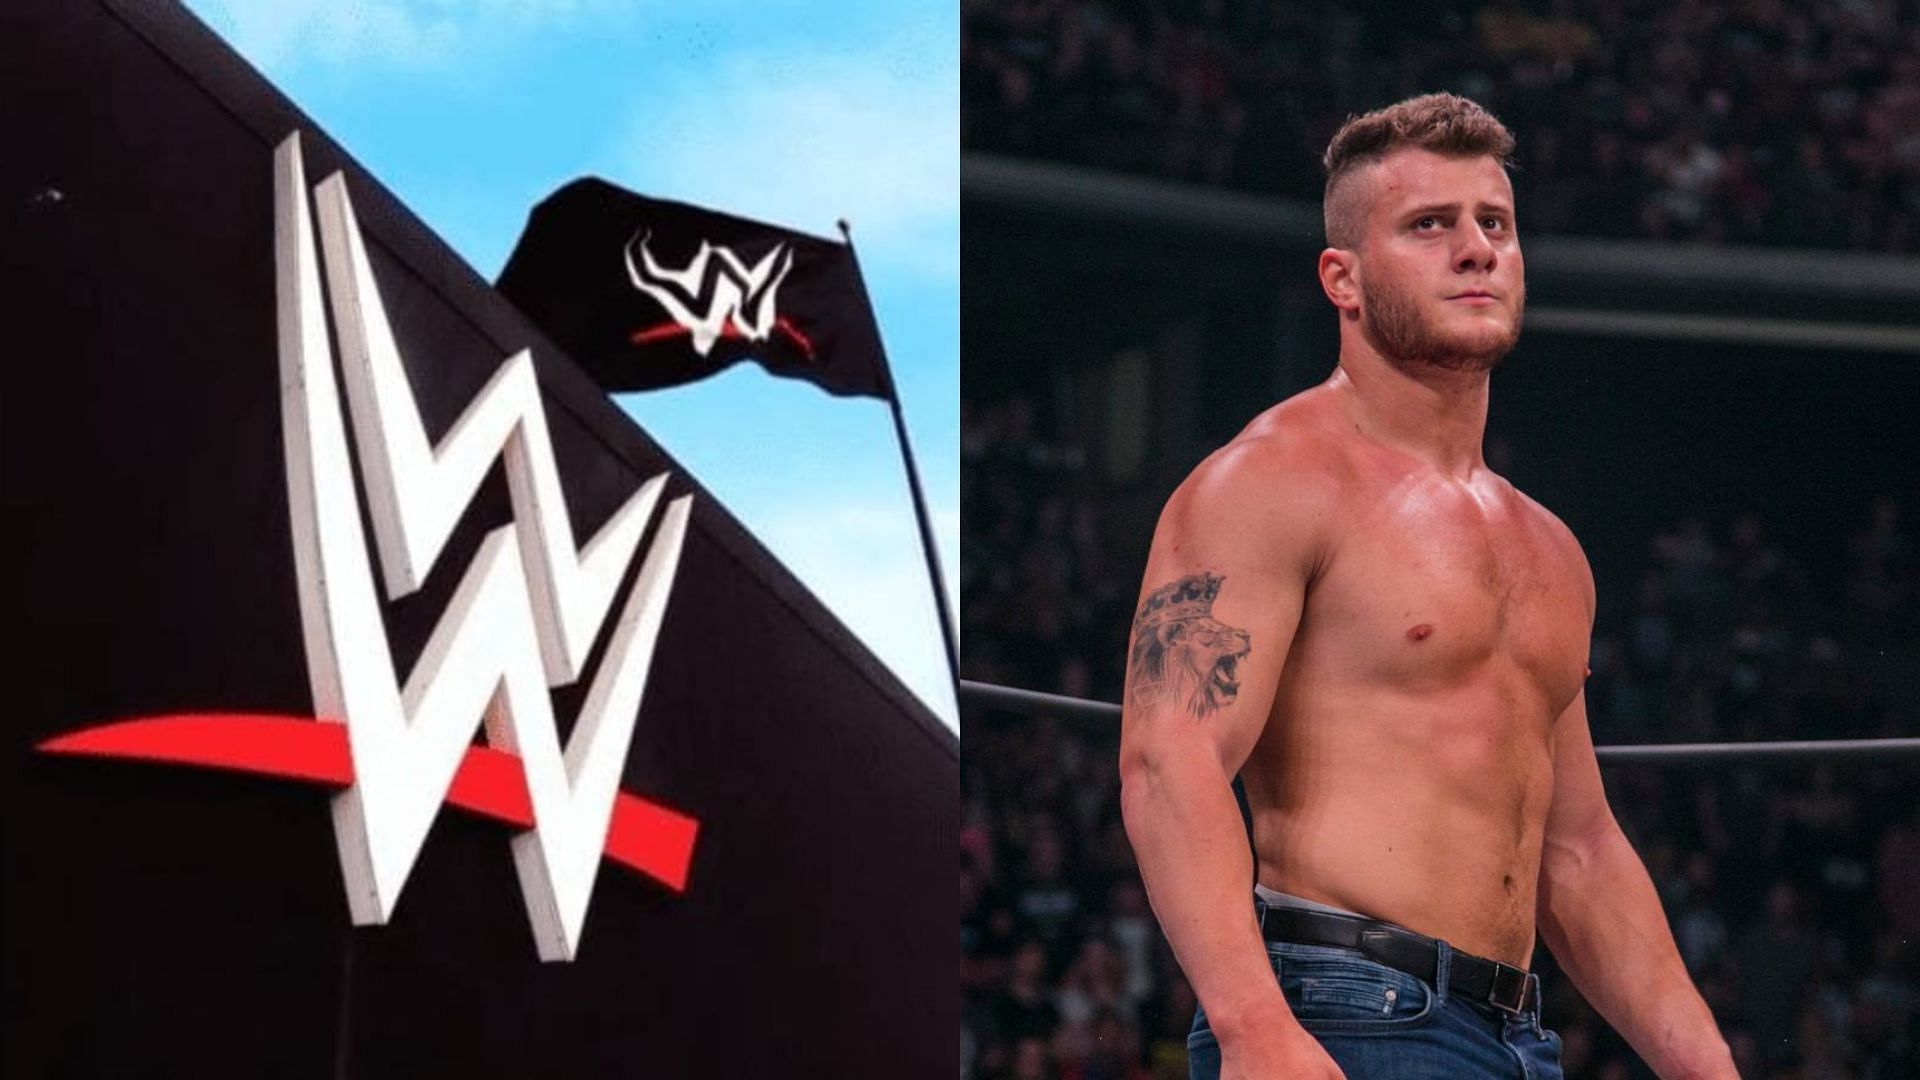 Will MJF join WWE in the future?